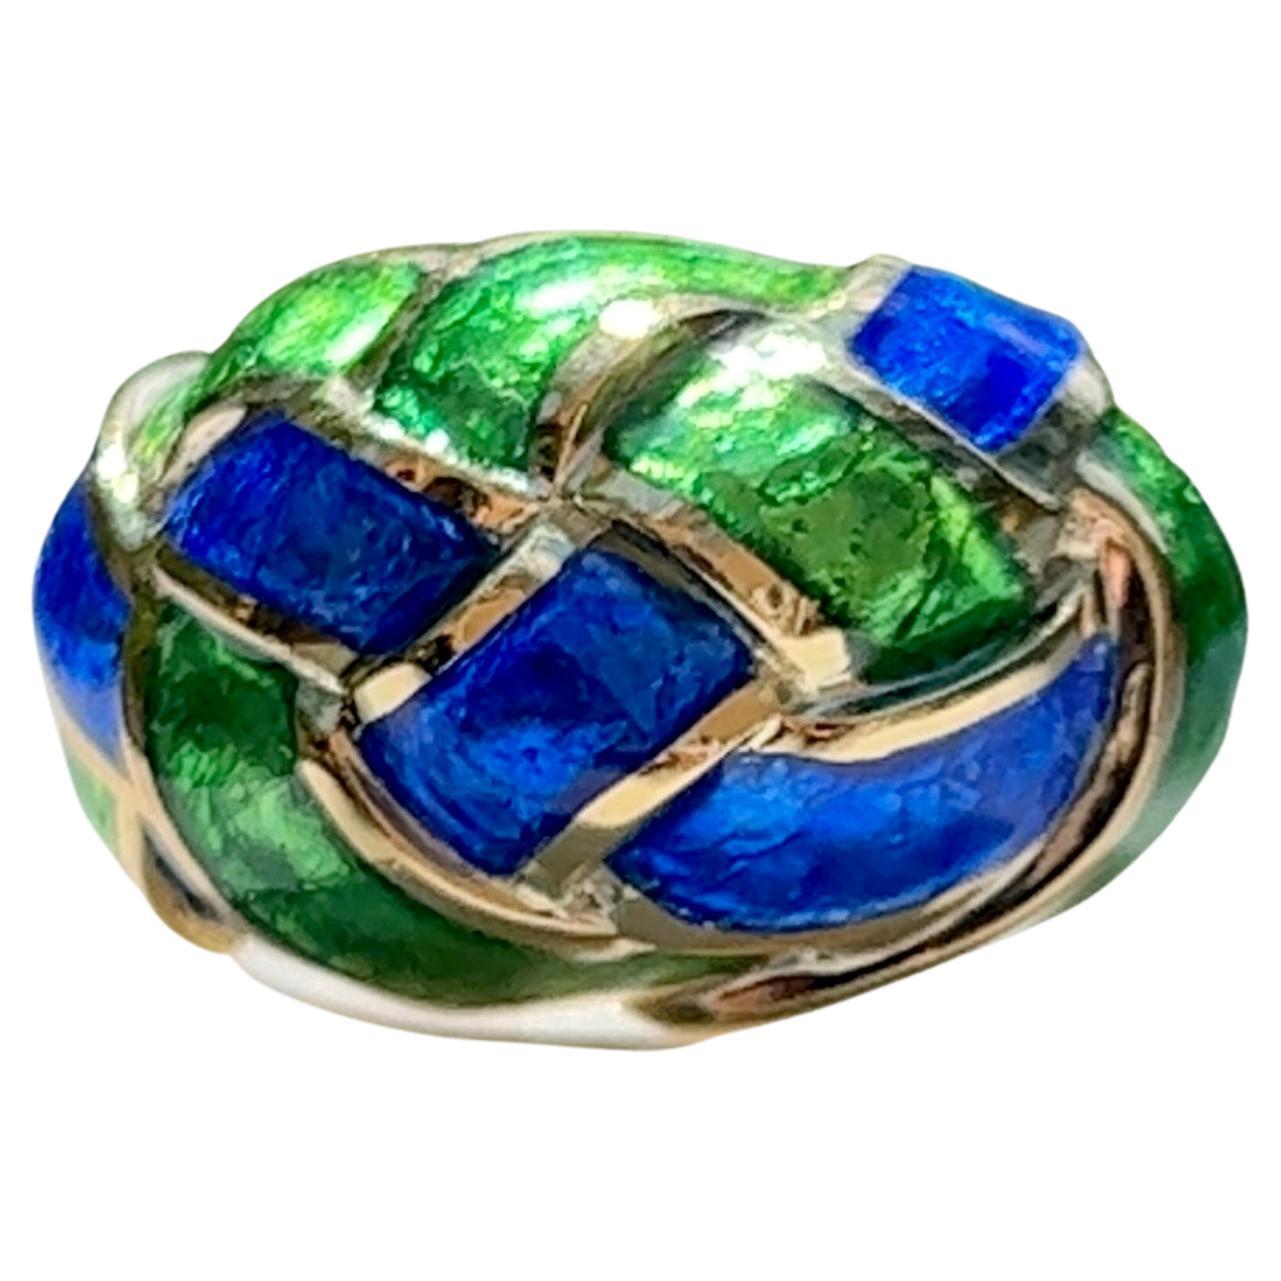 Jean Schlumberger for Tiffany & Co. Enamel Woven Knot Dome Ring